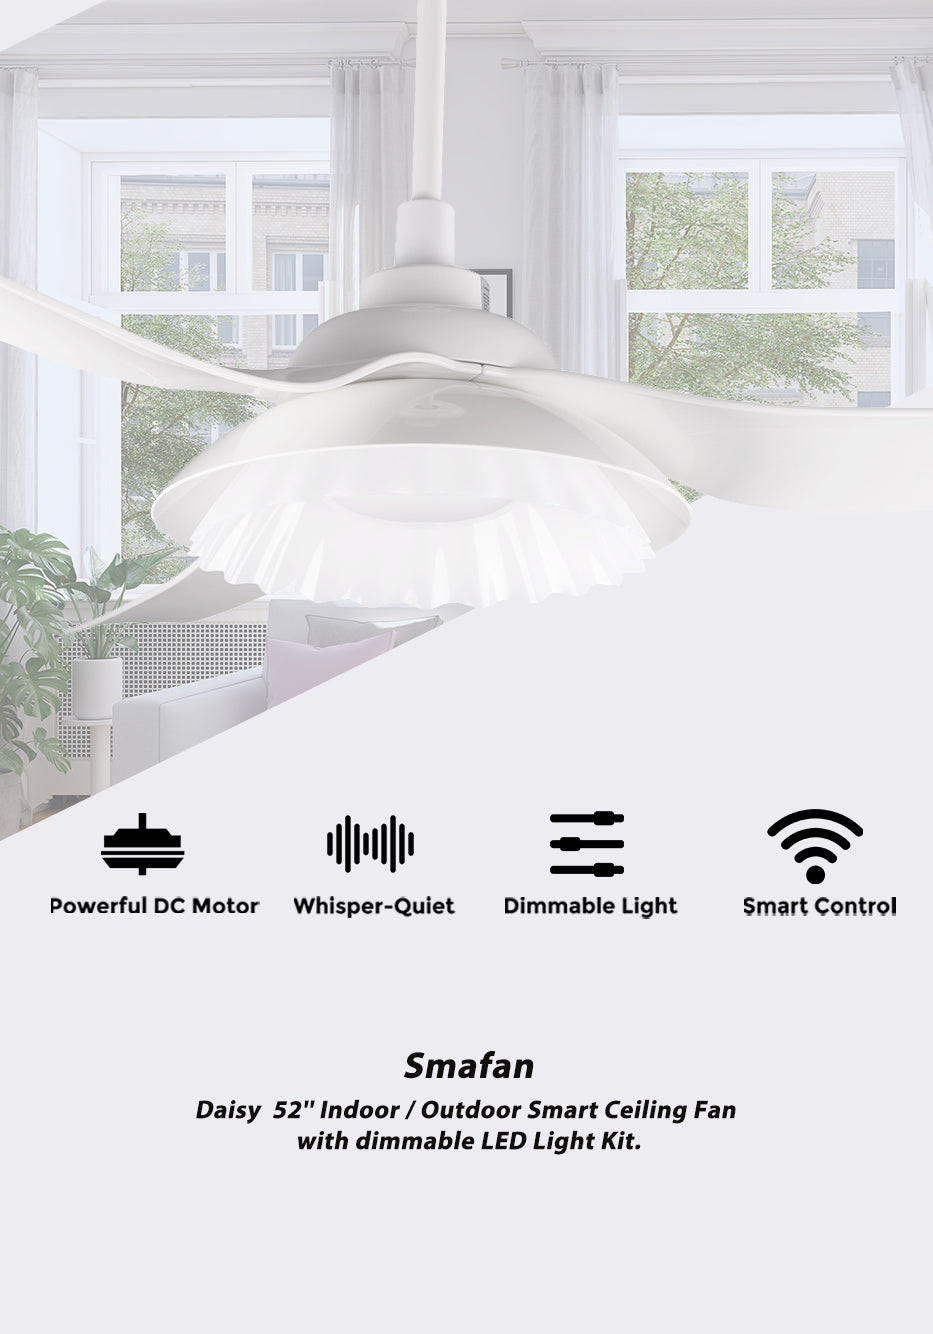 Carro-Smafan-Daisy-52”-Indoor-Outdoor-Wifi-Ceiling-Fan-with-Dimmable-LED-Light-Kit (2)